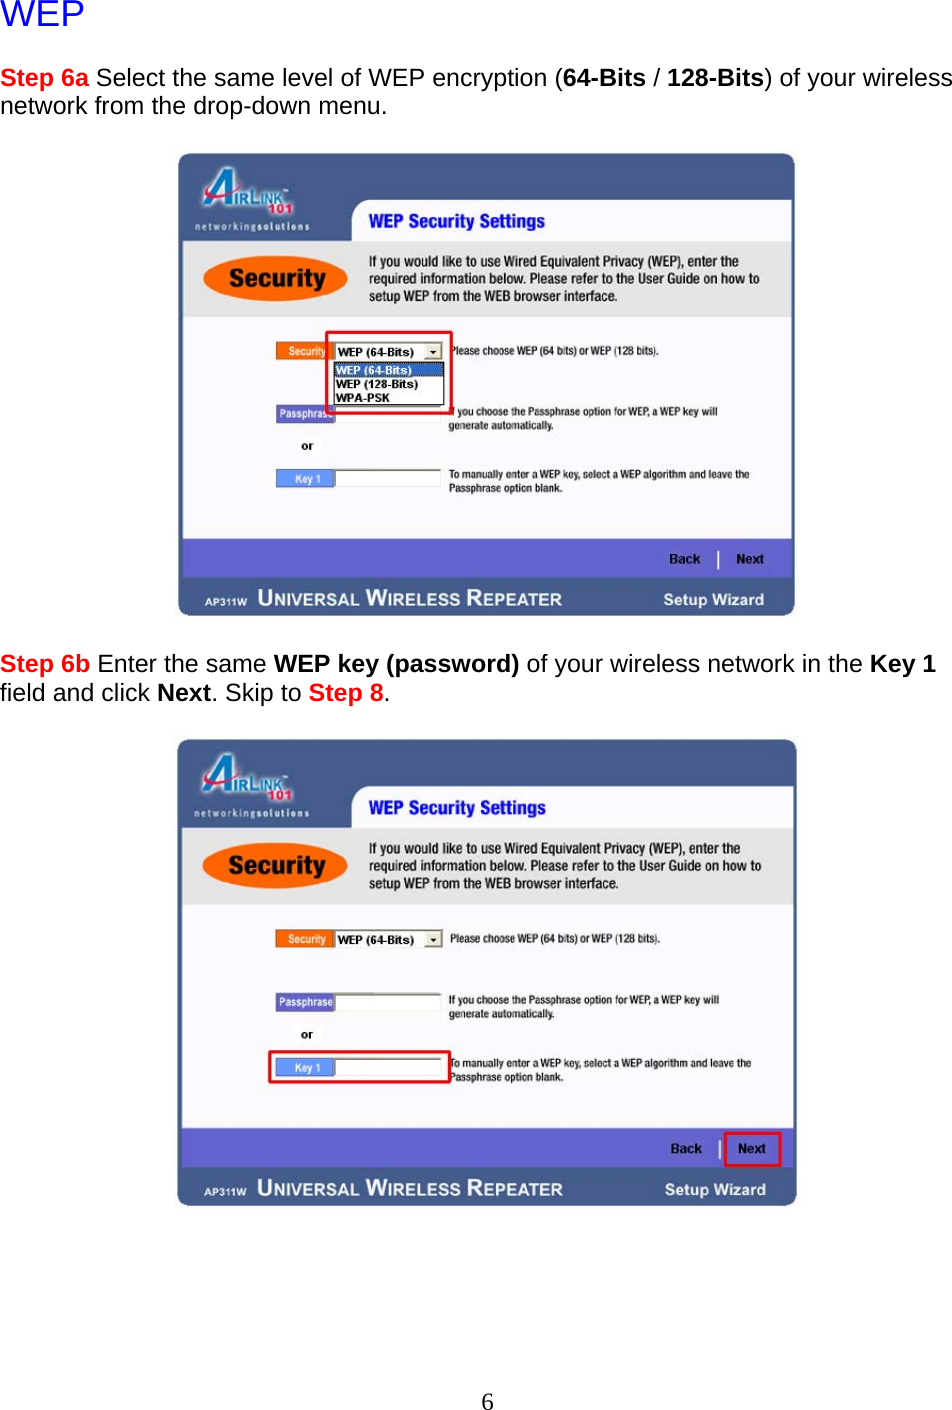 6 WEP  Step 6a Select the same level of WEP encryption (64-Bits / 128-Bits) of your wireless network from the drop-down menu.    Step 6b Enter the same WEP key (password) of your wireless network in the Key 1 field and click Next. Skip to Step 8.       